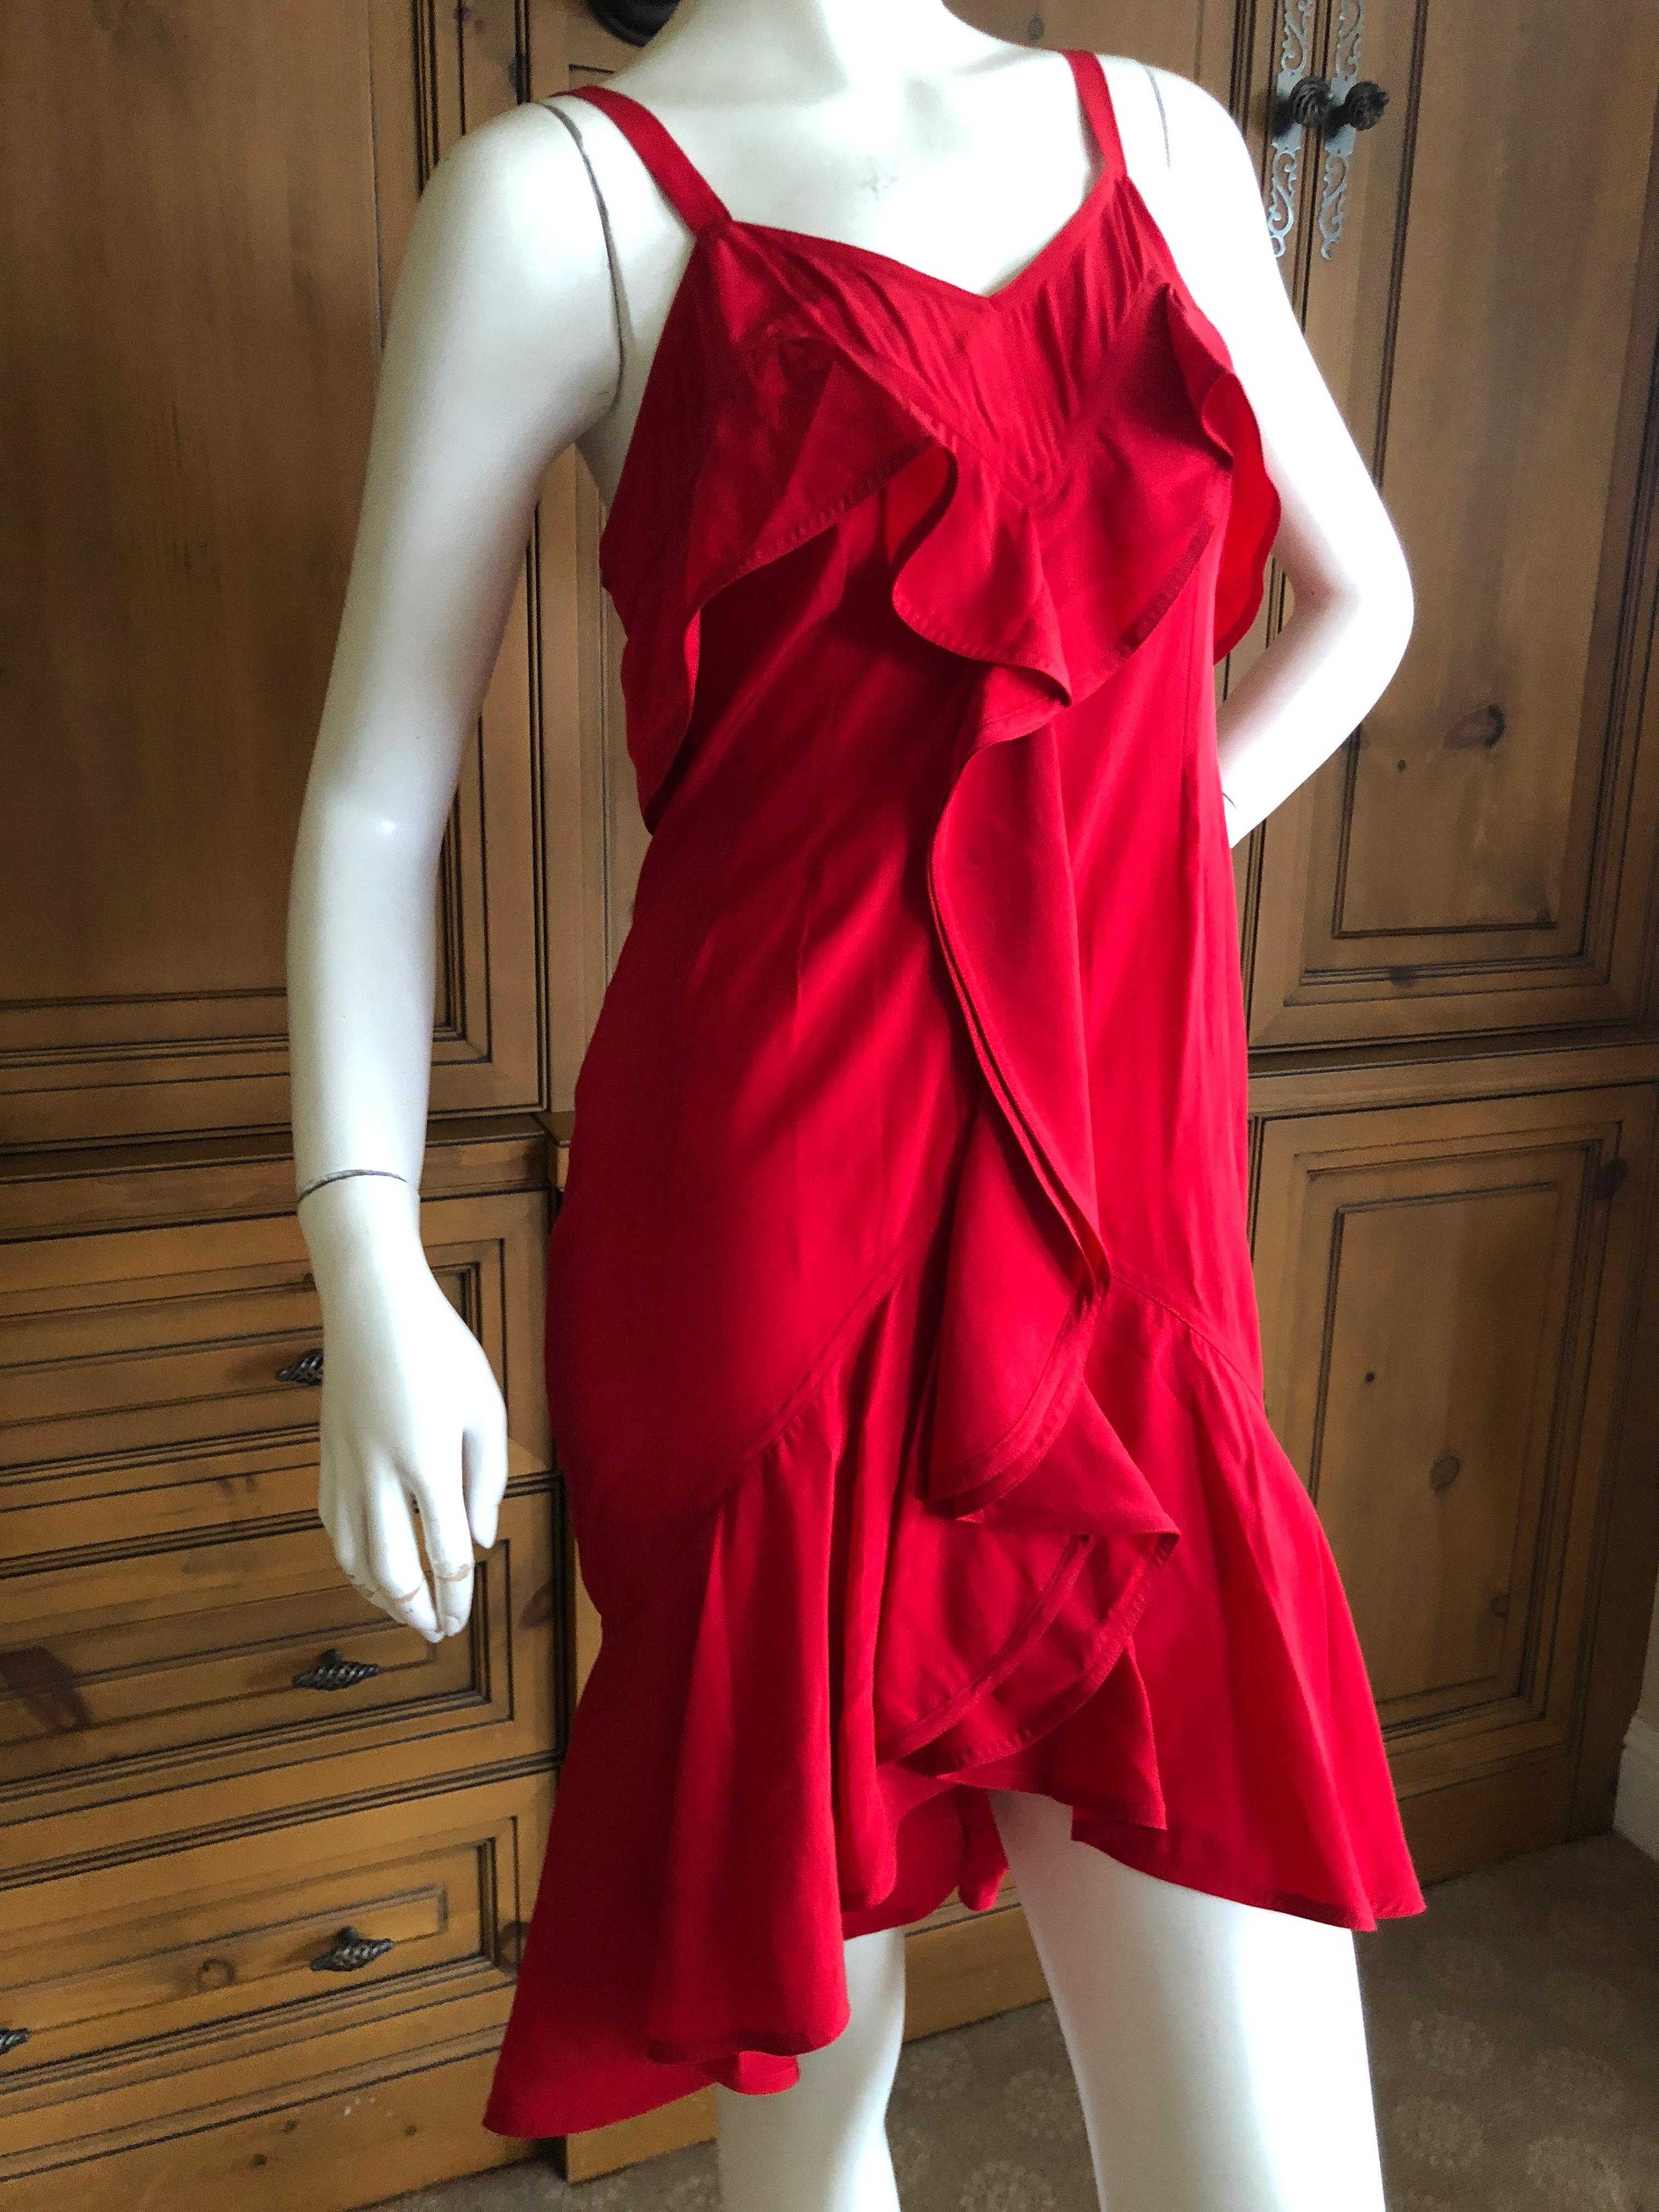 Yves Saint Laurent Tom Ford Fall 2003 Look 1 Red Ruffle Dress In Excellent Condition For Sale In Cloverdale, CA